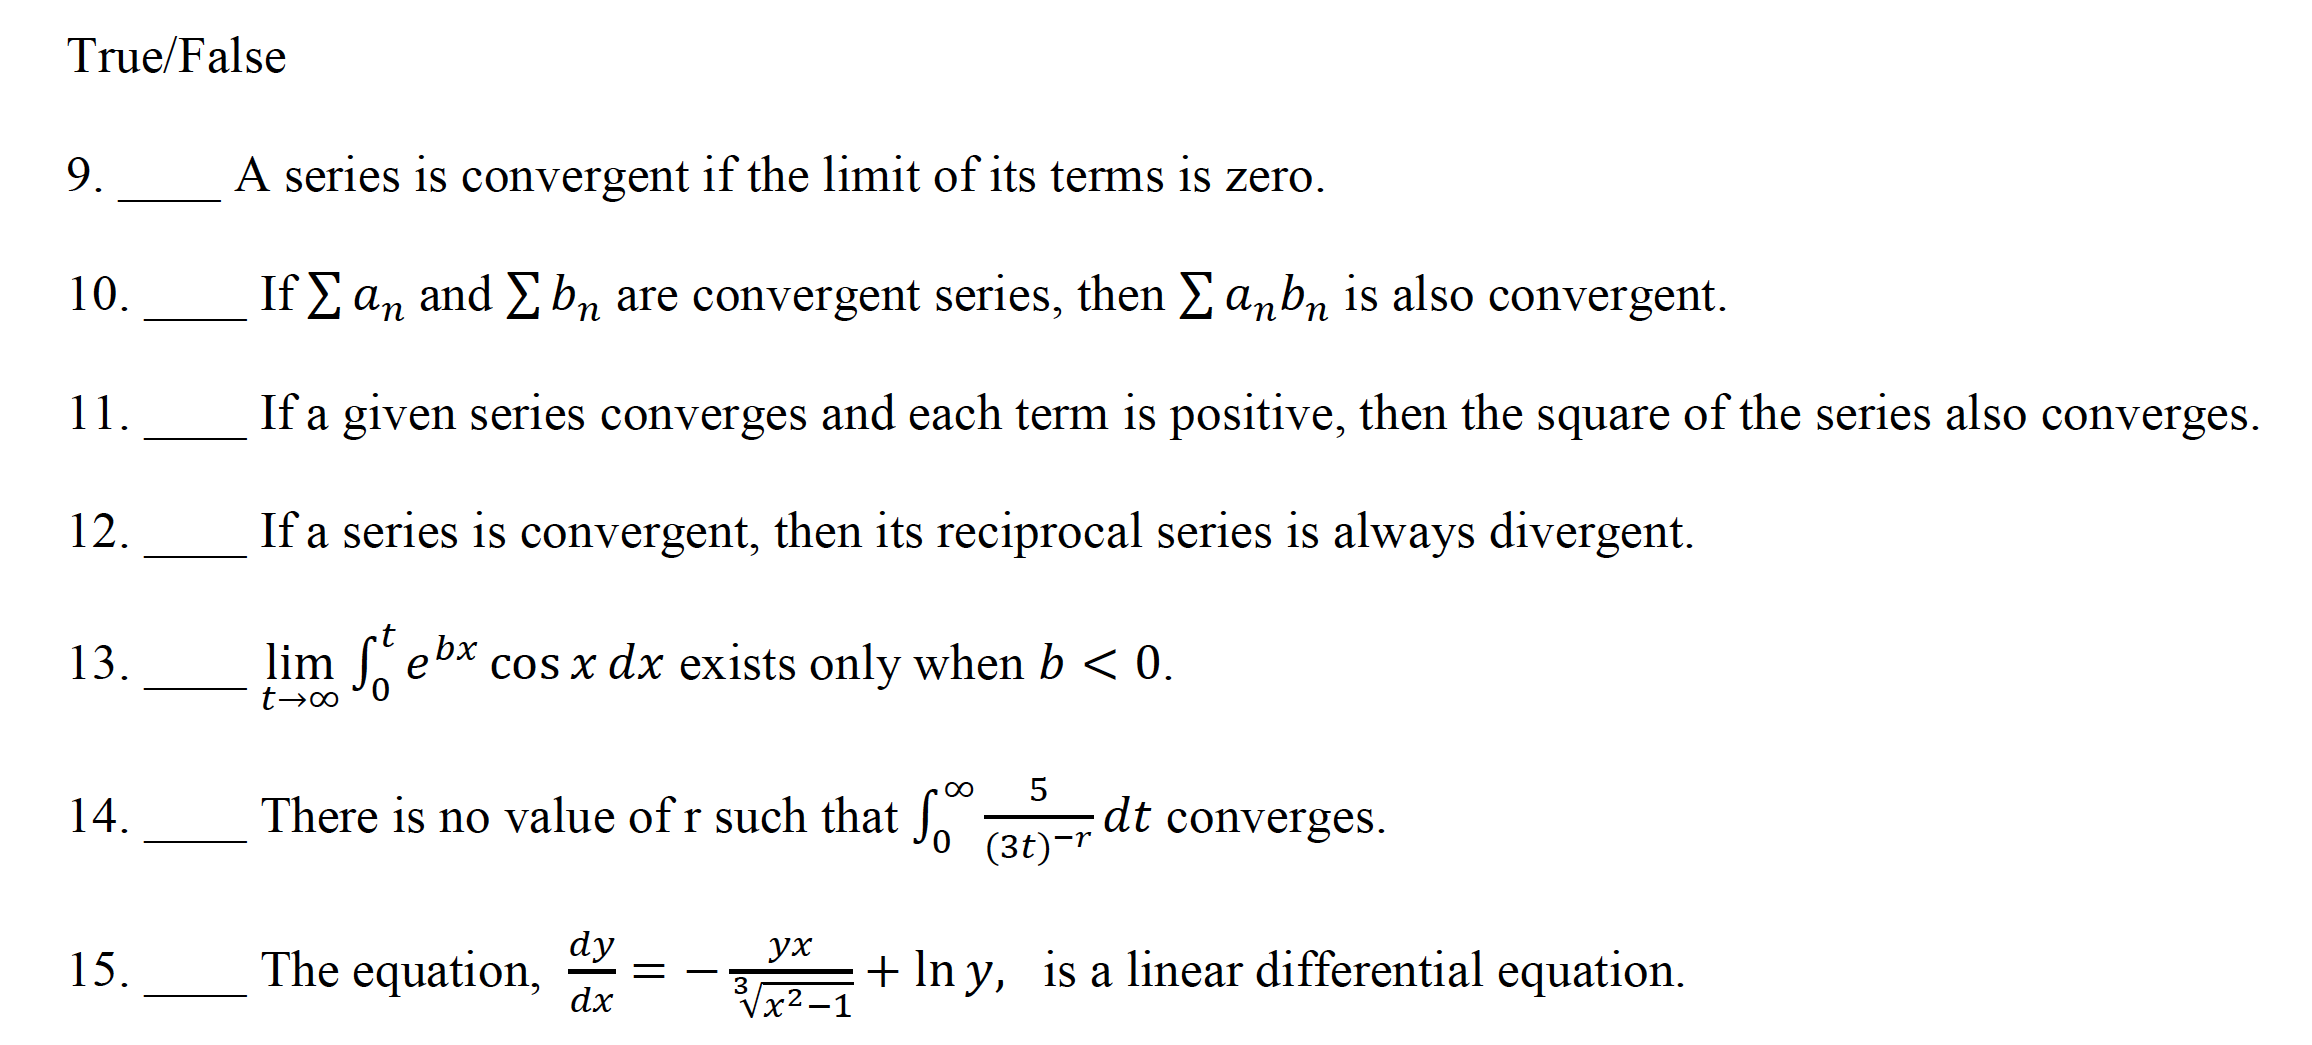 If a given series converges and each term is positive, then the square of the series also converges.
